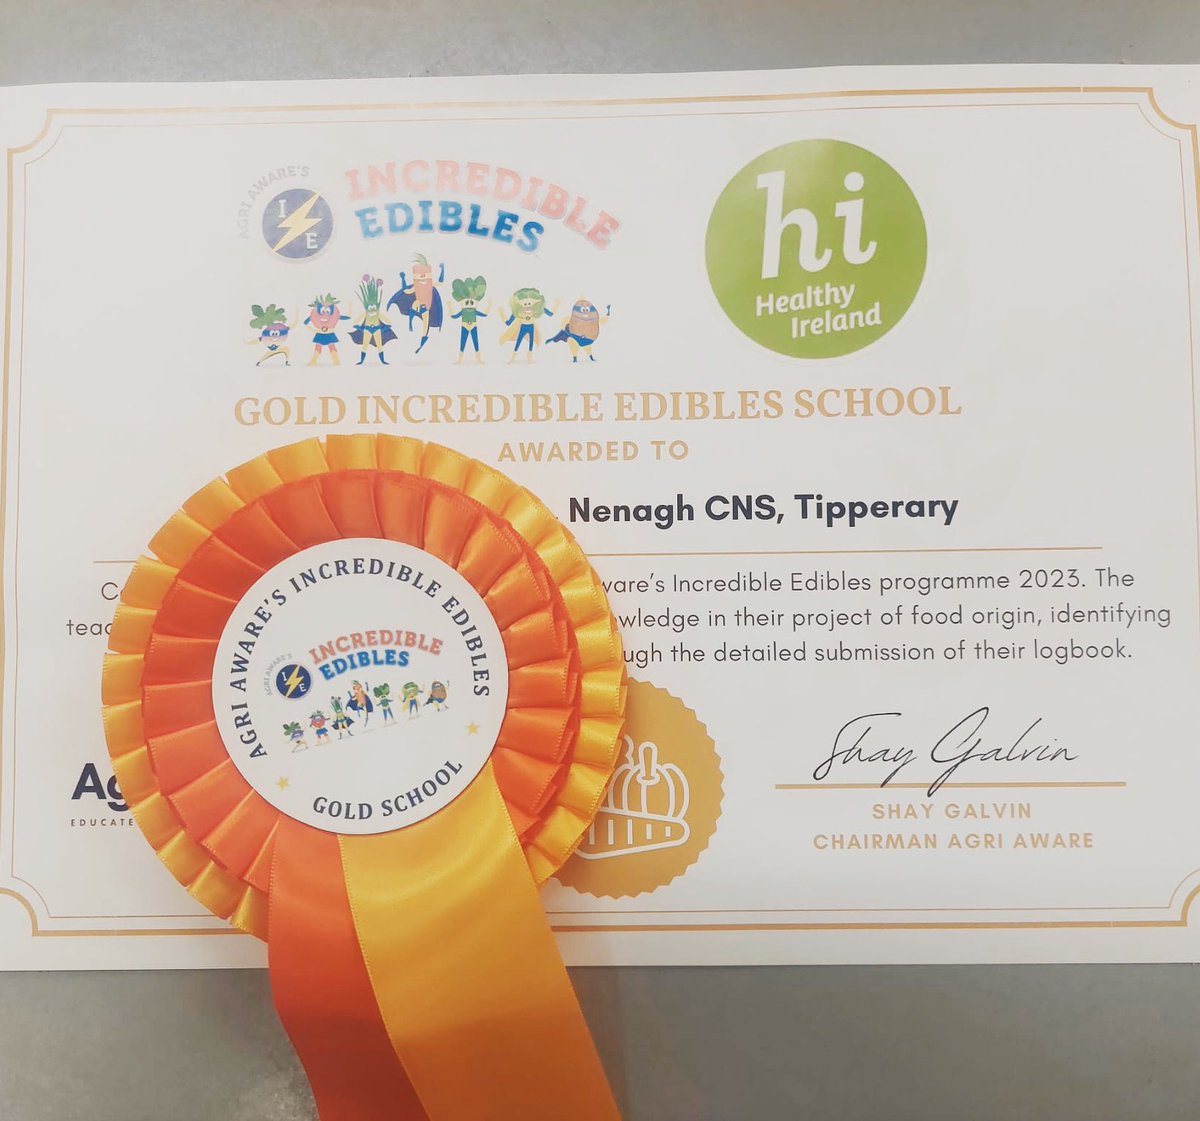 We are delighted to announce we are a Gold Incredible Edibles School🥳🥳🥳

Well done to everyone who put in a massive effort to achieve this award #incredibleedibles @AgriAware